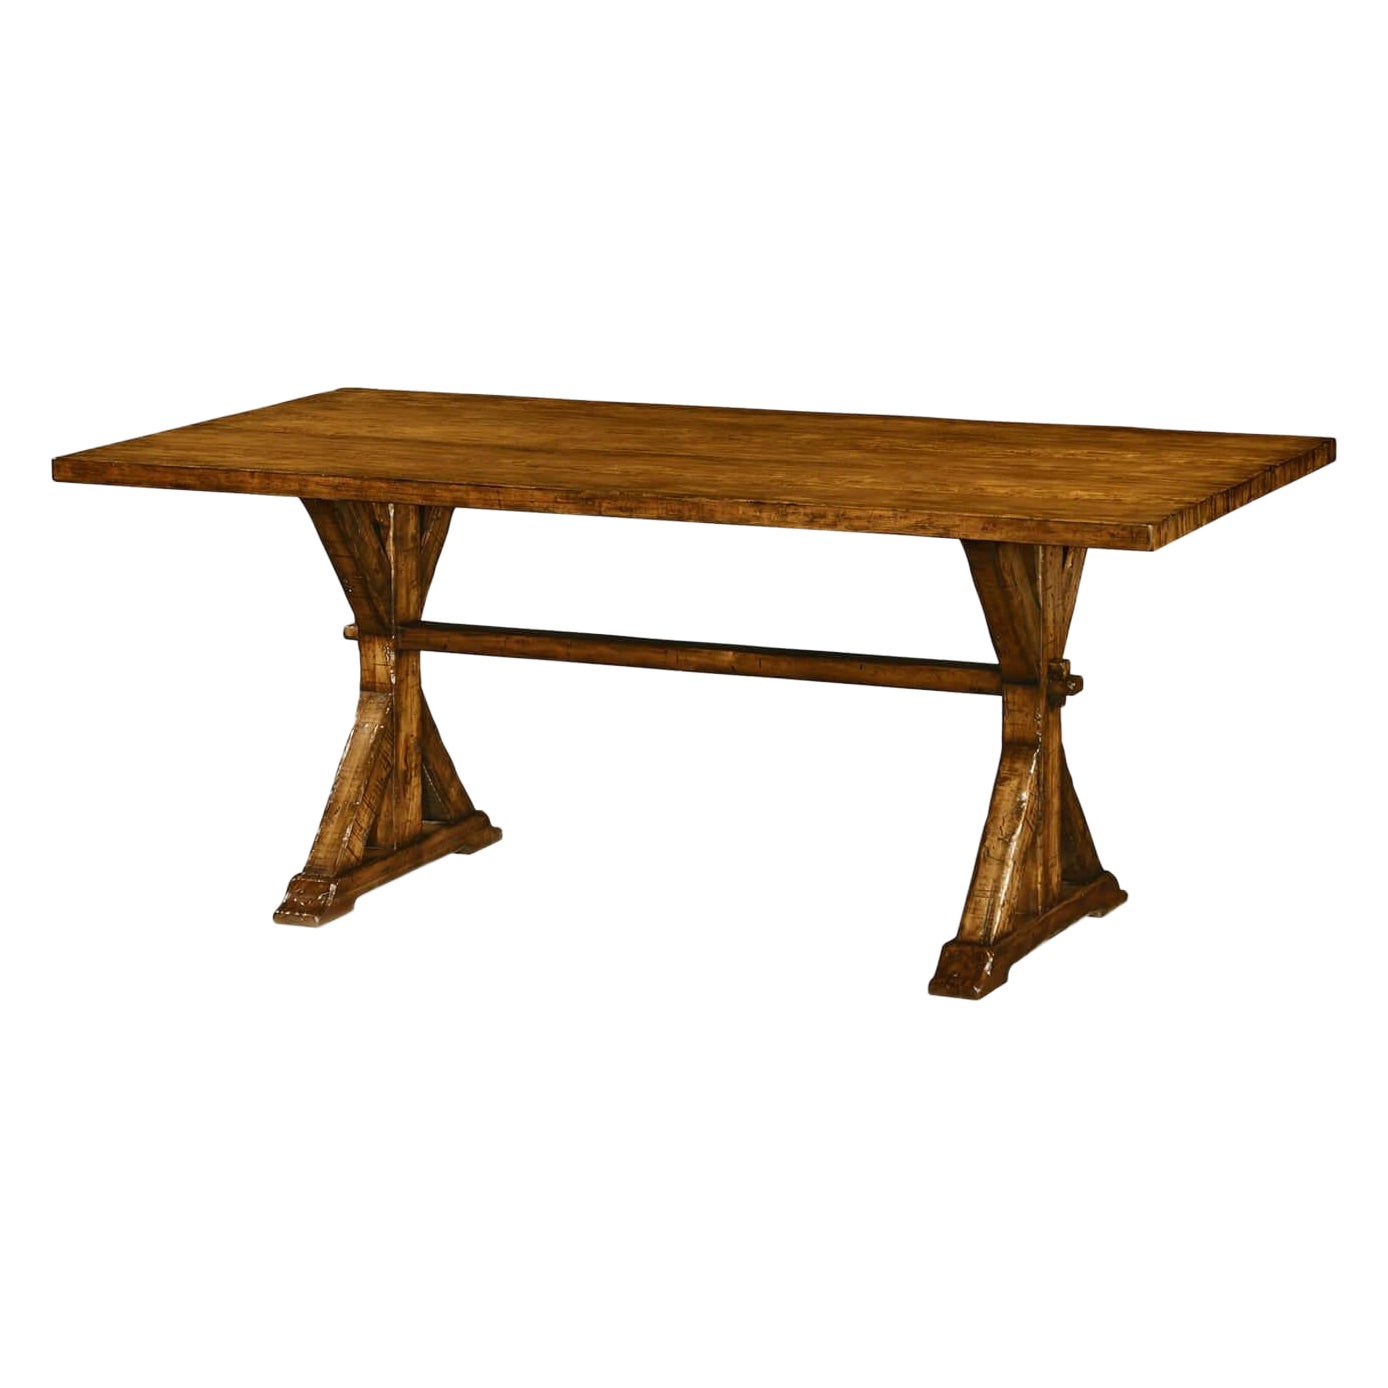 Rustic Country Walnut Refectory Dining Table For Sale